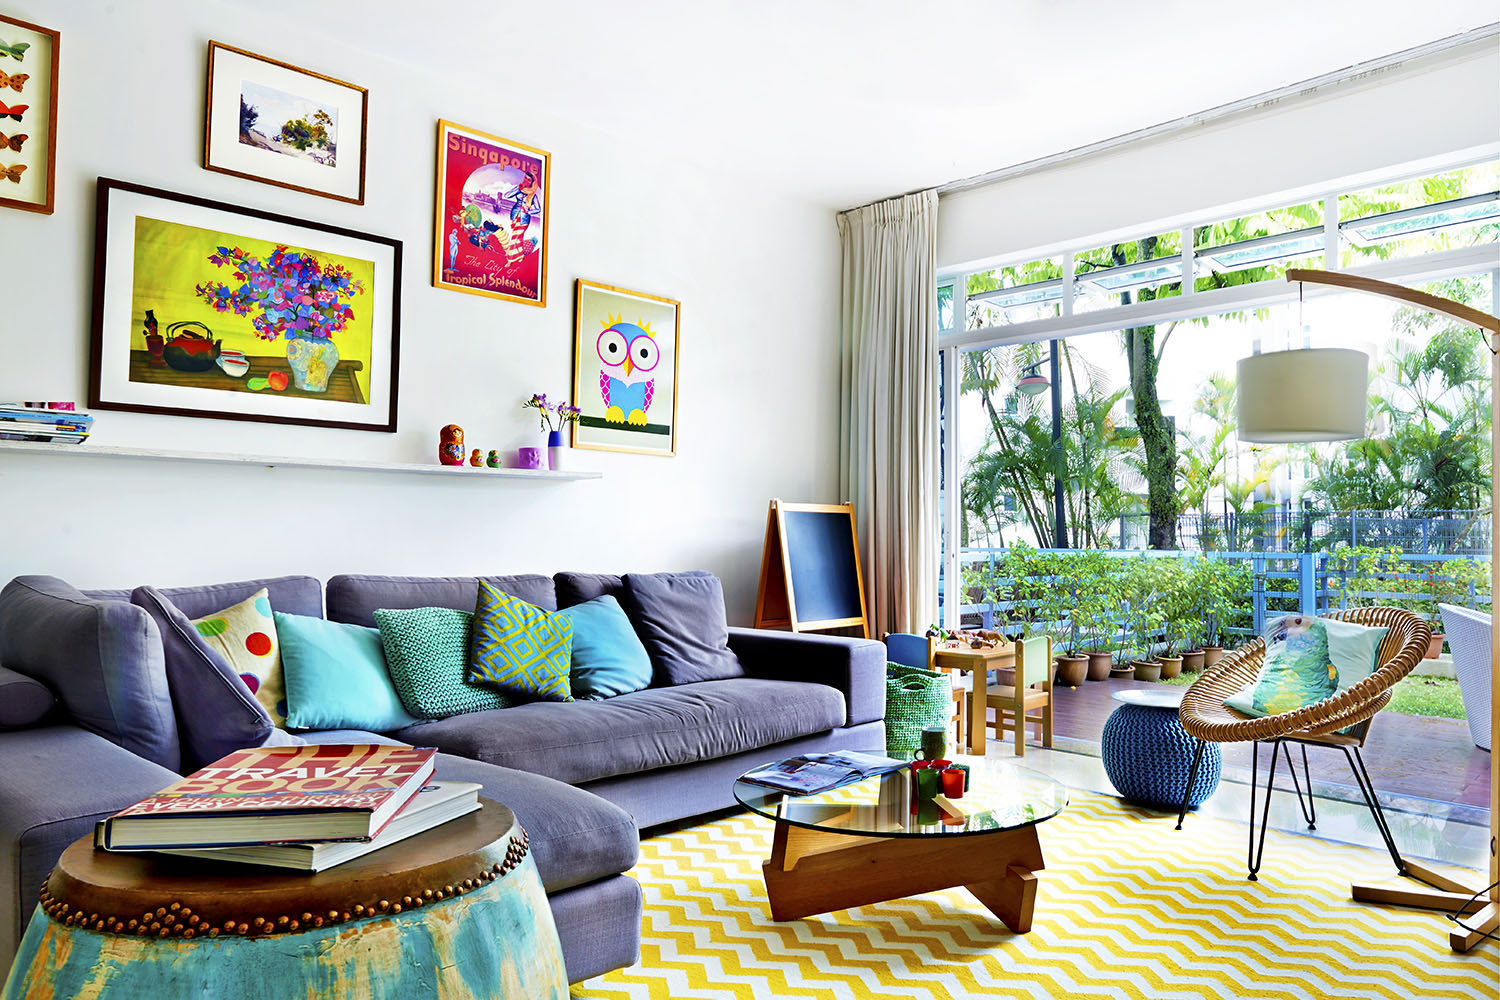 20 Eclectic Interior Design Ideas for the Living Room